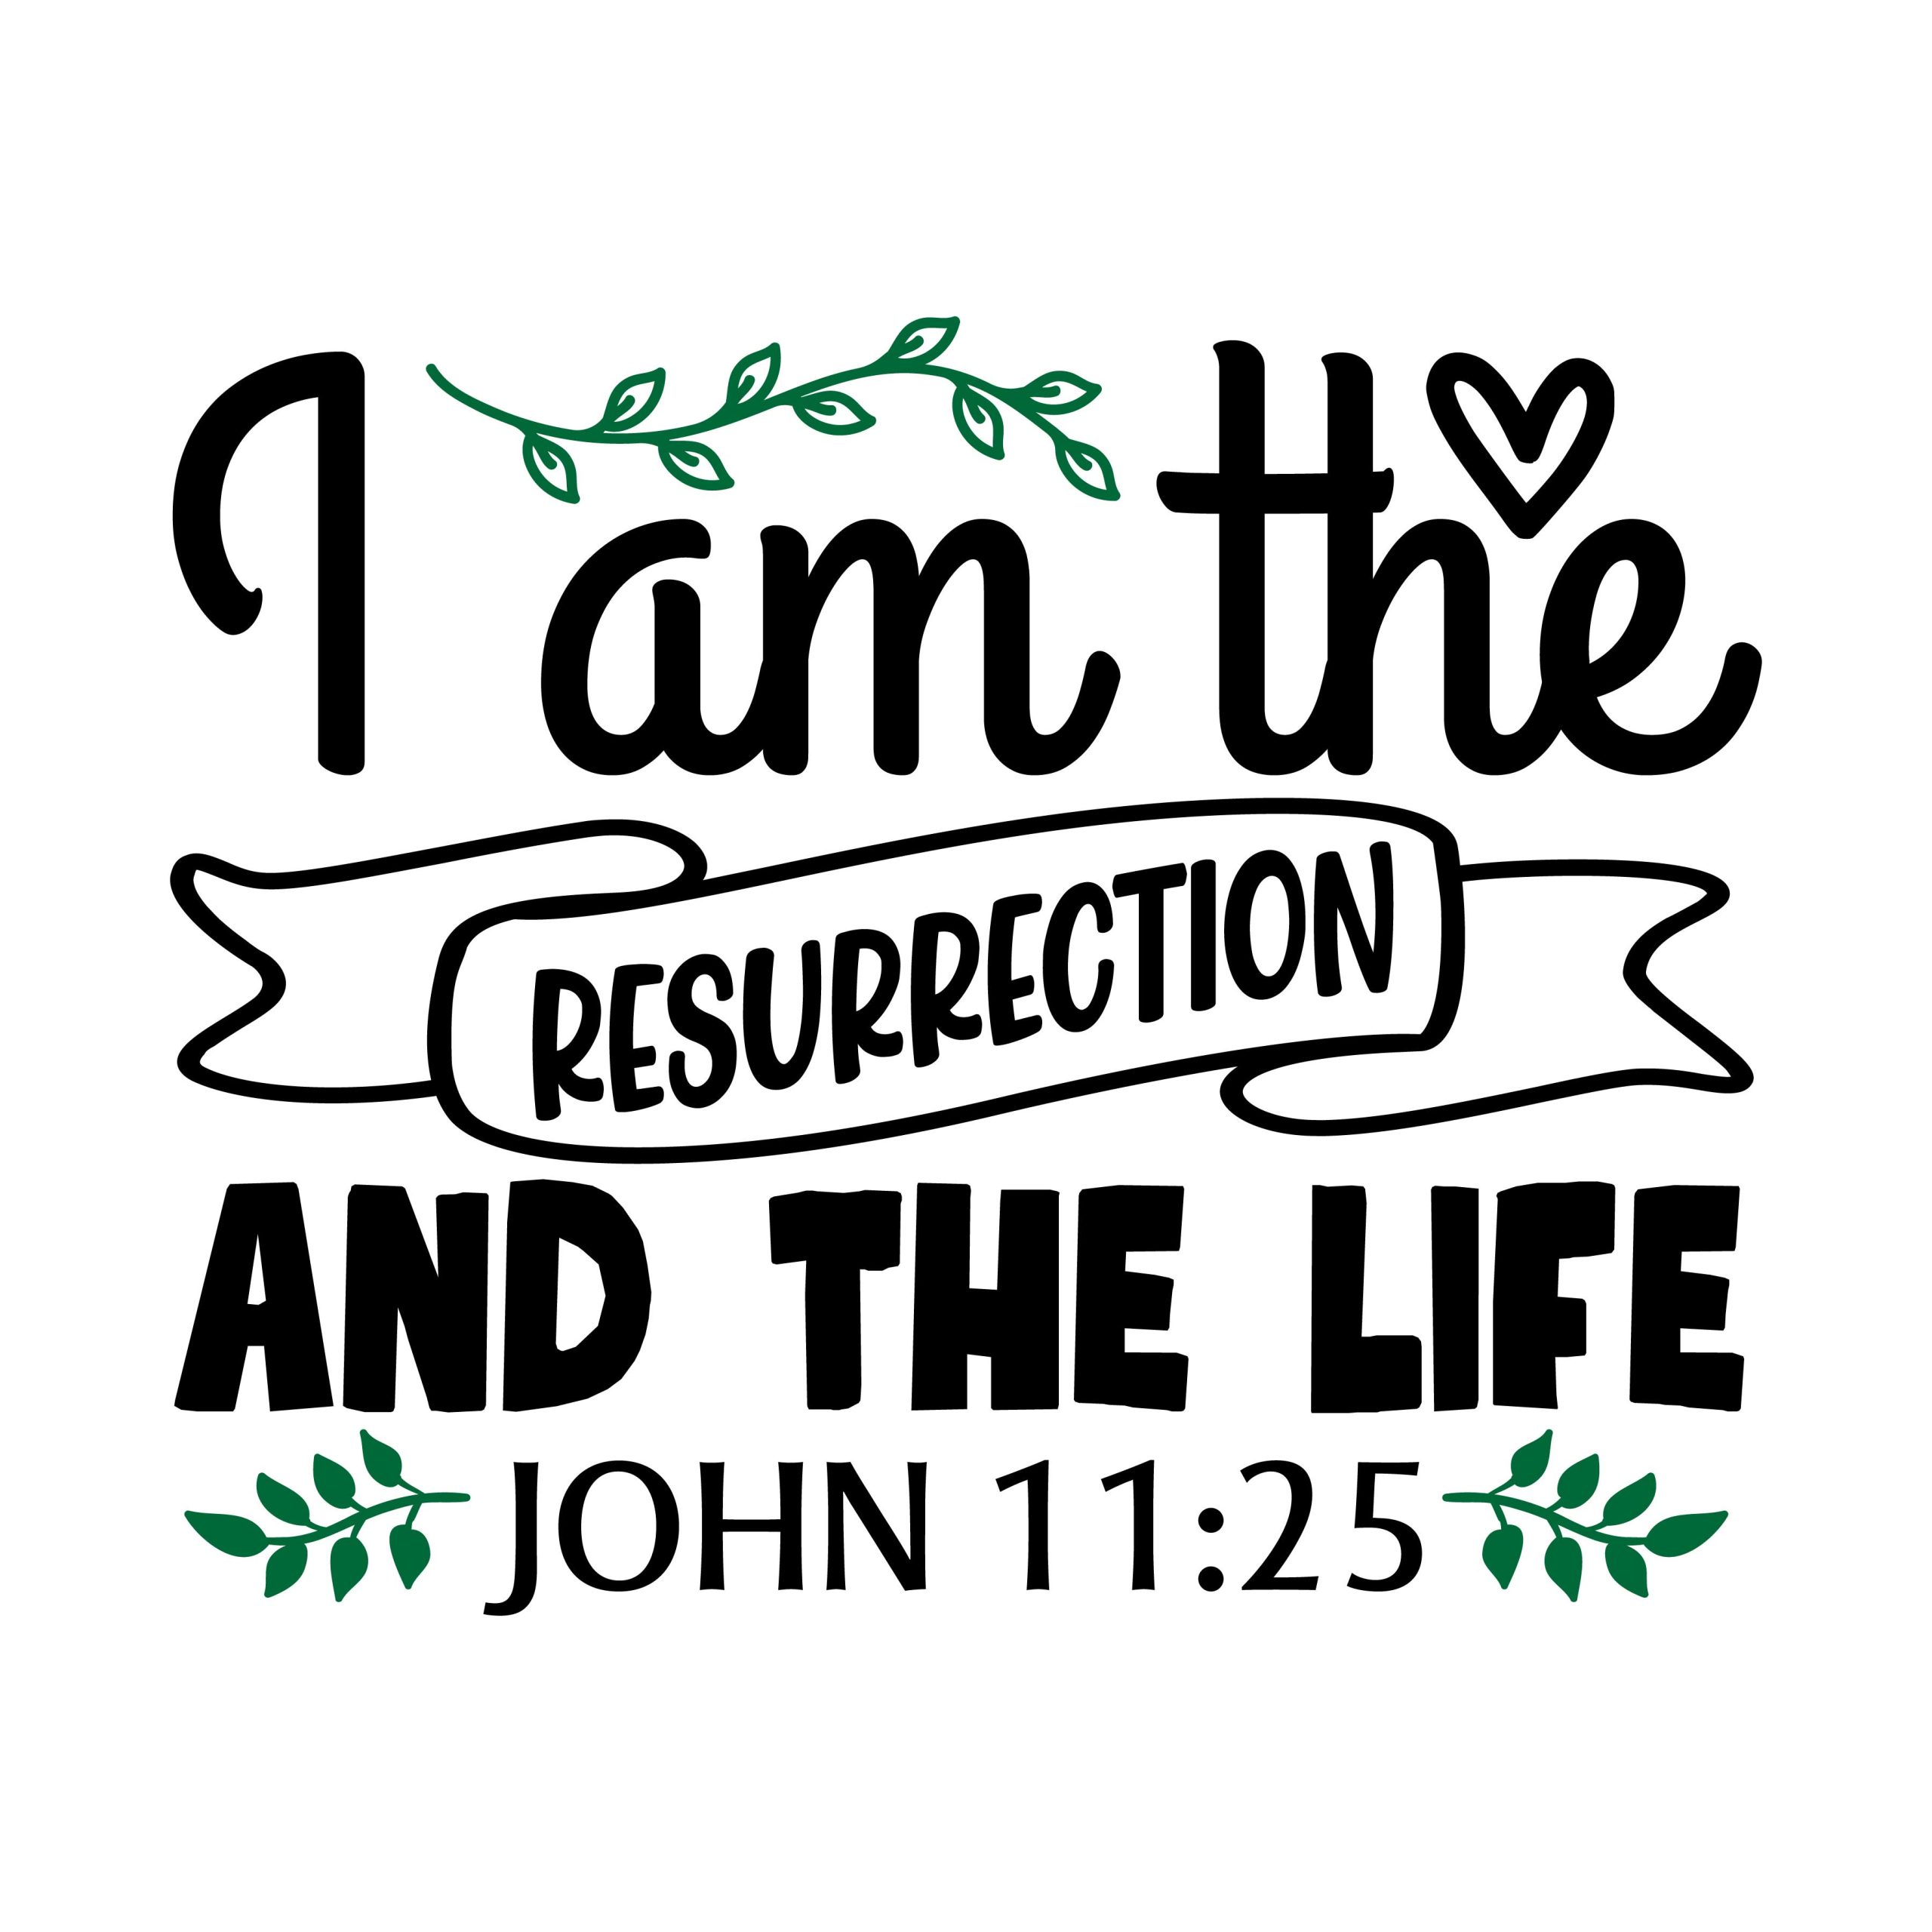 I am the resurrection and the life, John 11:25 , bible verses, scripture verses, svg files, passages, sayings, cricut designs, silhouette, embroidery, bundle, free cut files, design space, vector